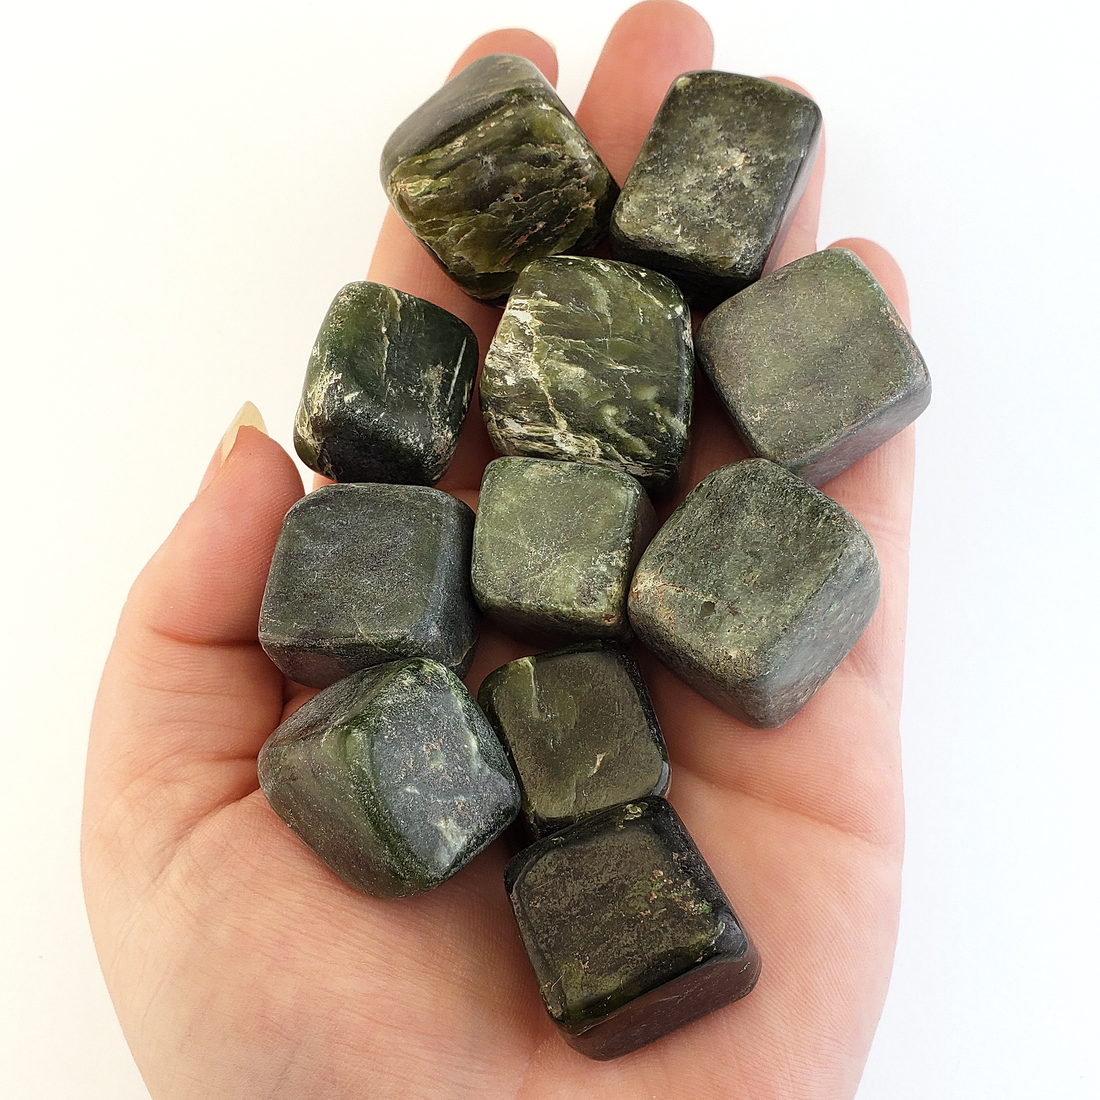 Nephrite Jade Natural Tumbled Stone - One Stone - In Hand